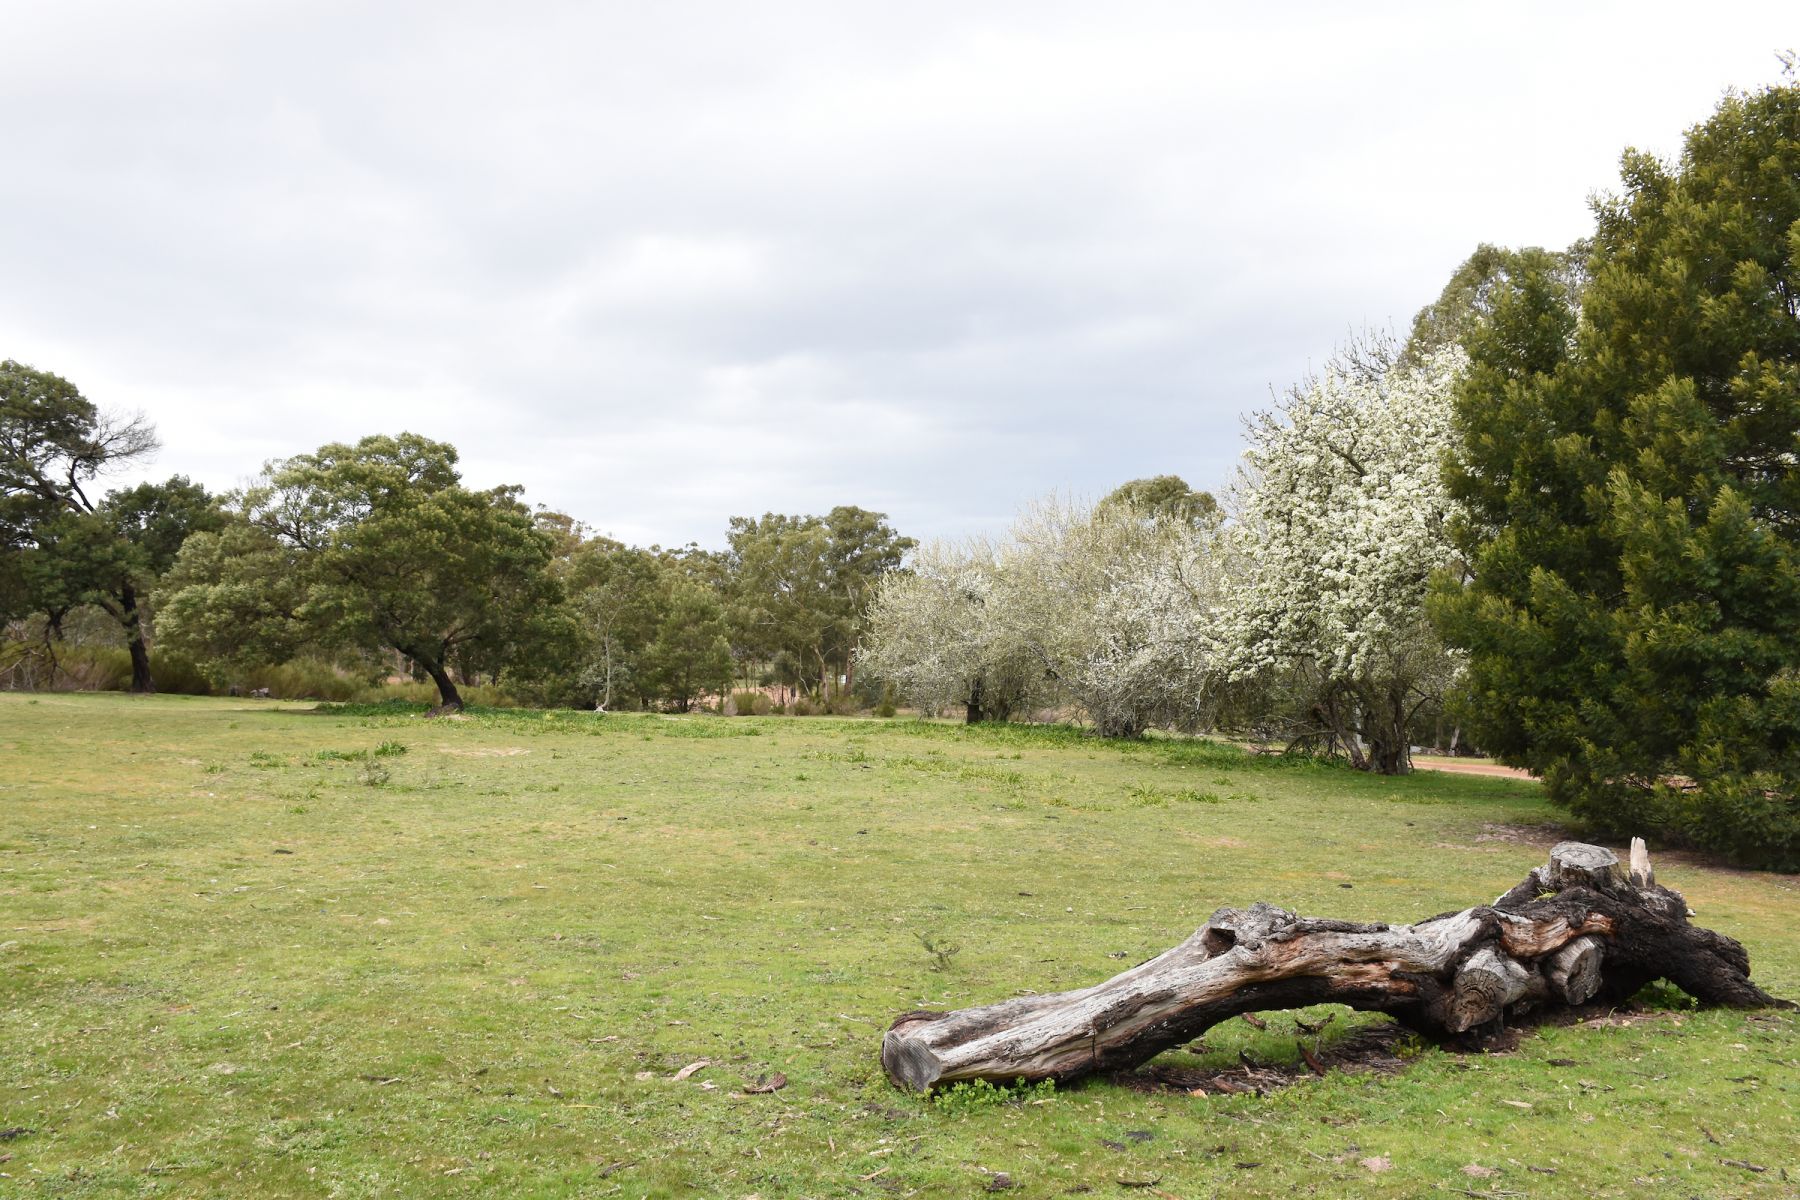 A large grassy area surrounded by flowering trees with a log in the foreground